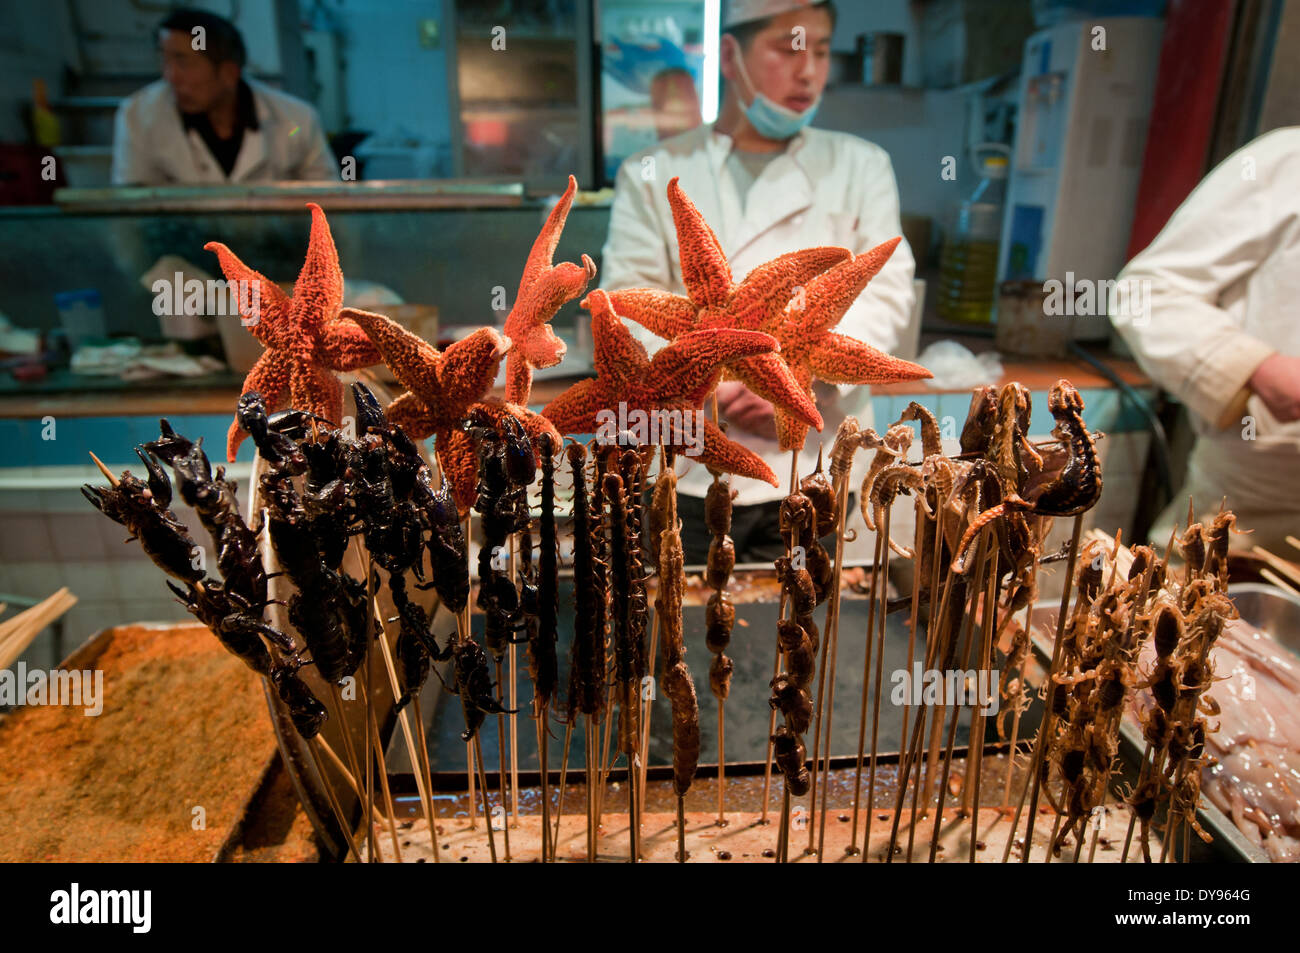 rats, lizards, scorpions and starfishes on food stall at Wangfujing Snack Street in Dongcheng District, Beijing, China Stock Photo